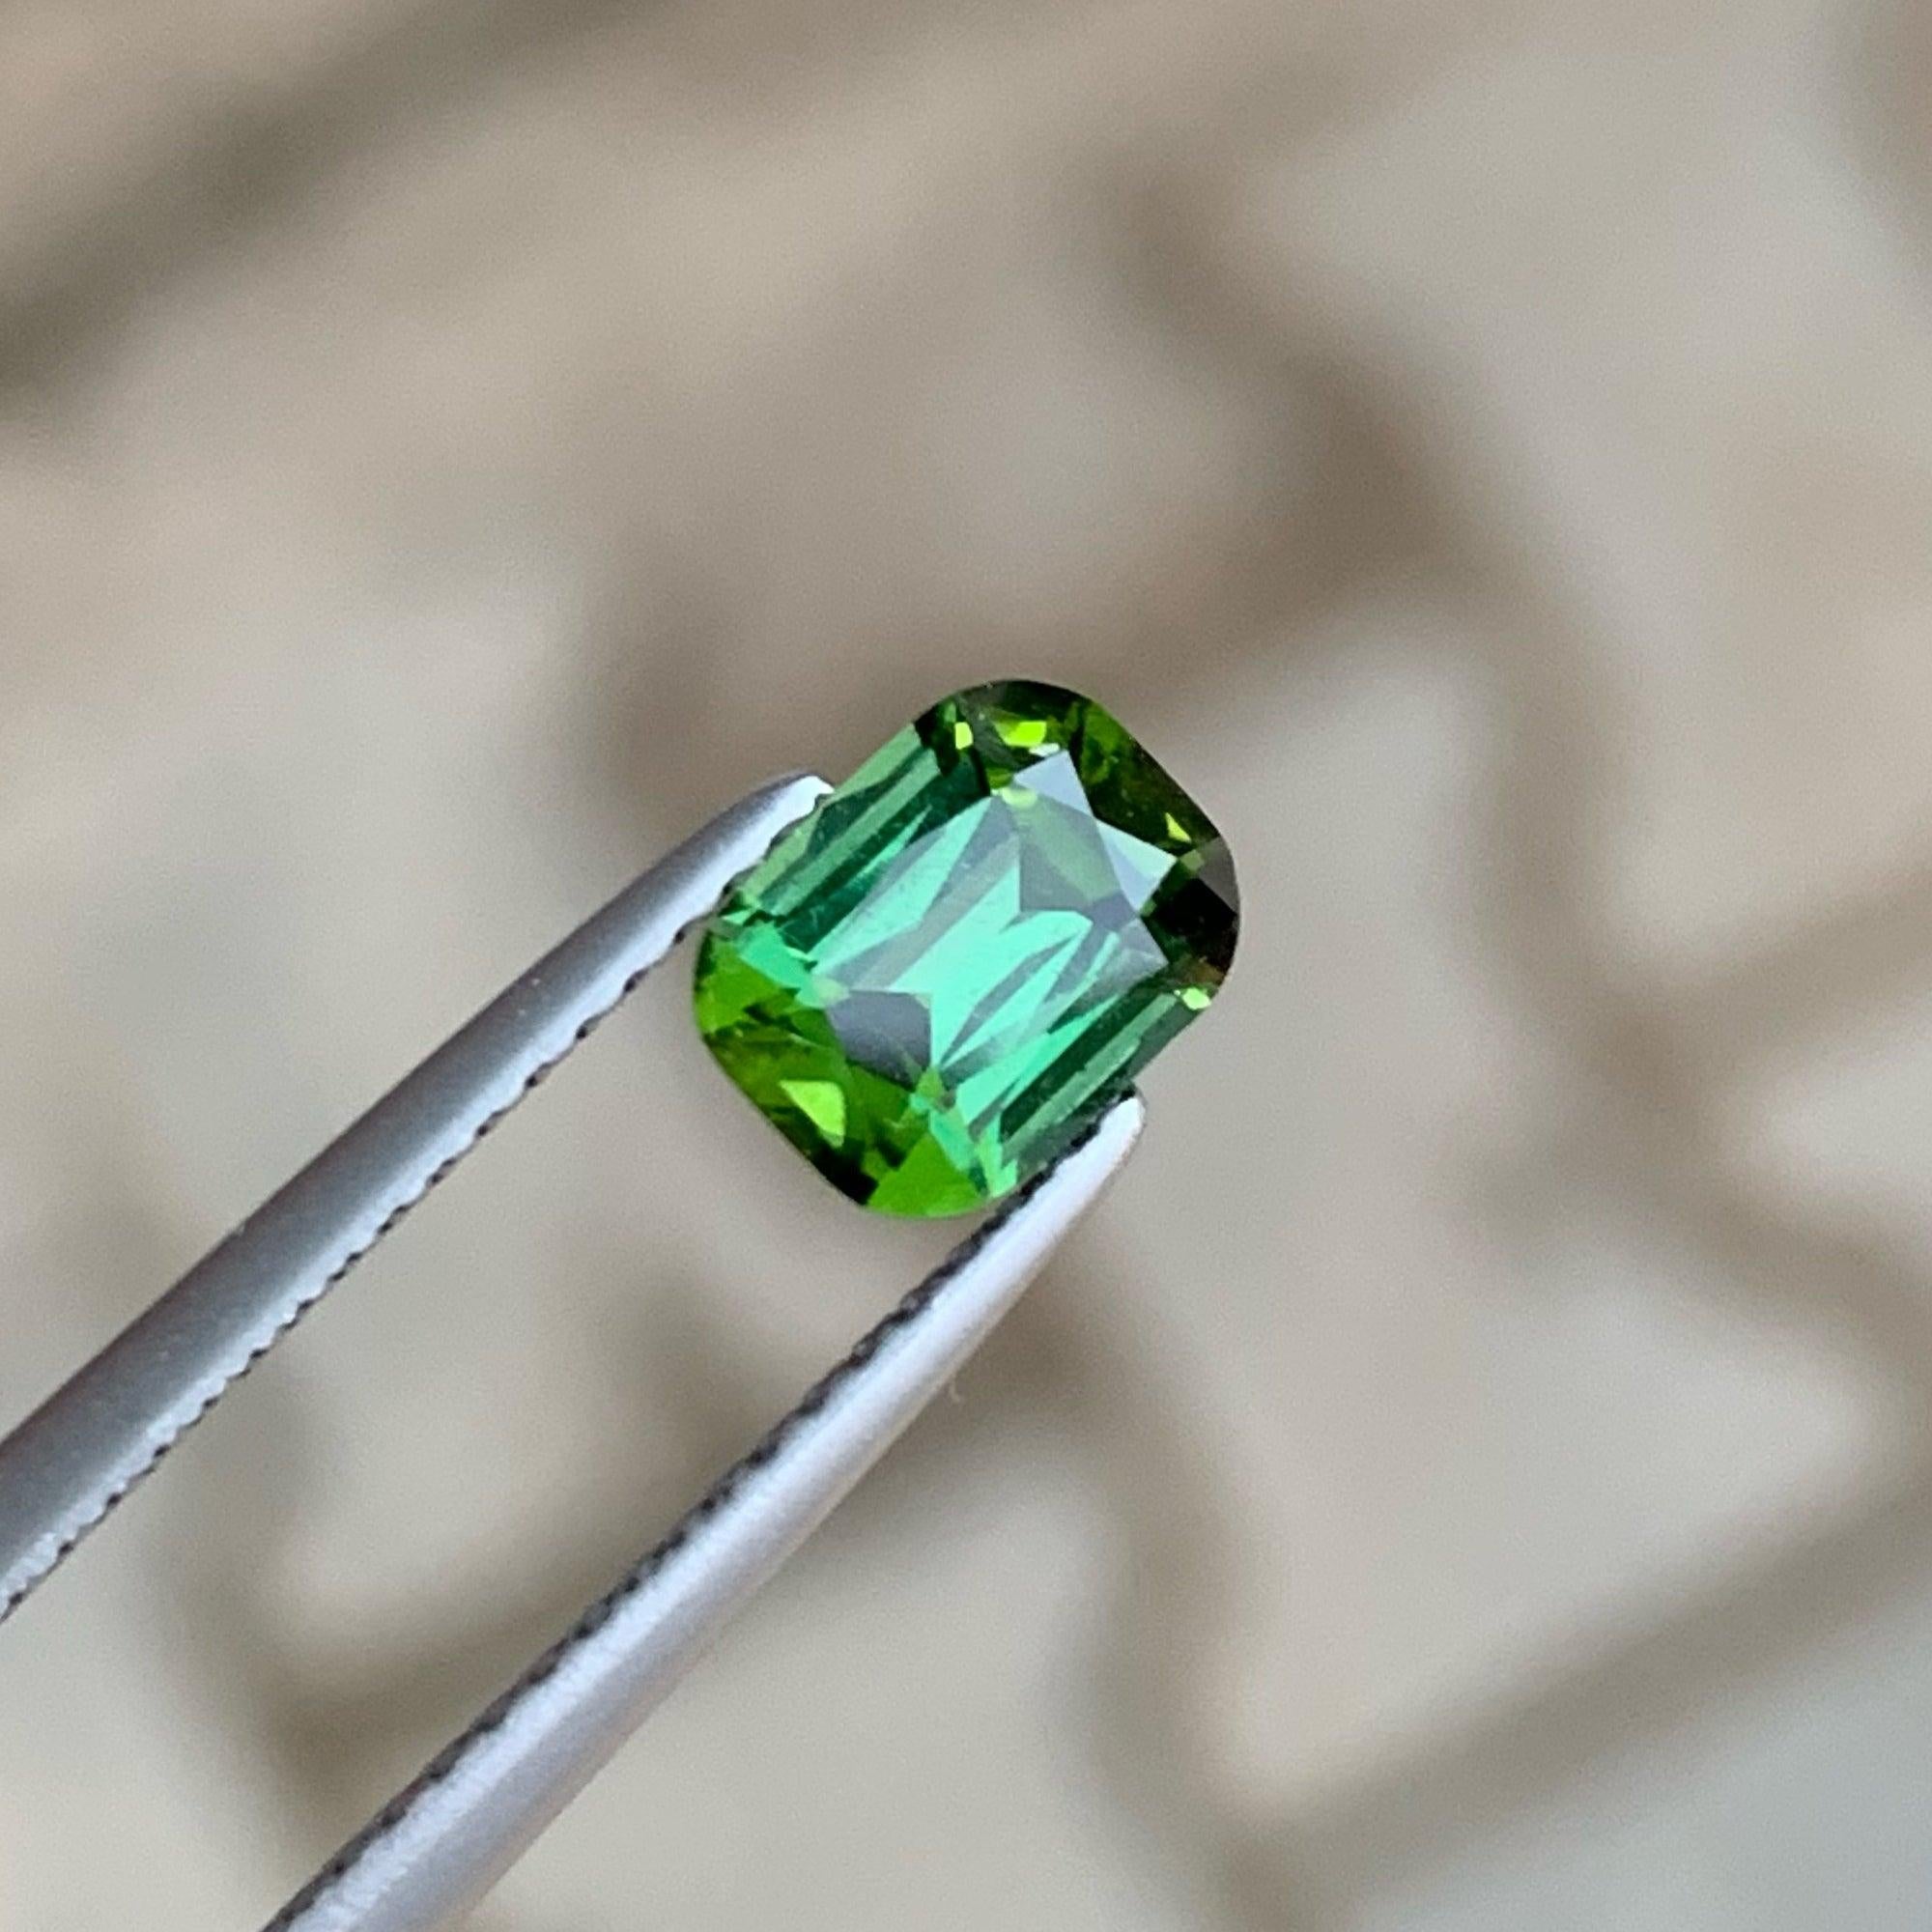 Exquisite Mint Green Cut Tourmaline Stone, Available For Sale At Wholesale Price Natural High Quality 1.00 Carats Vvs Clarity Natural Loose Tourmaline From Afghanistan.

Production Information:
GEMSTONE TYPE:	Exquisite Mint Green Cut Tourmaline